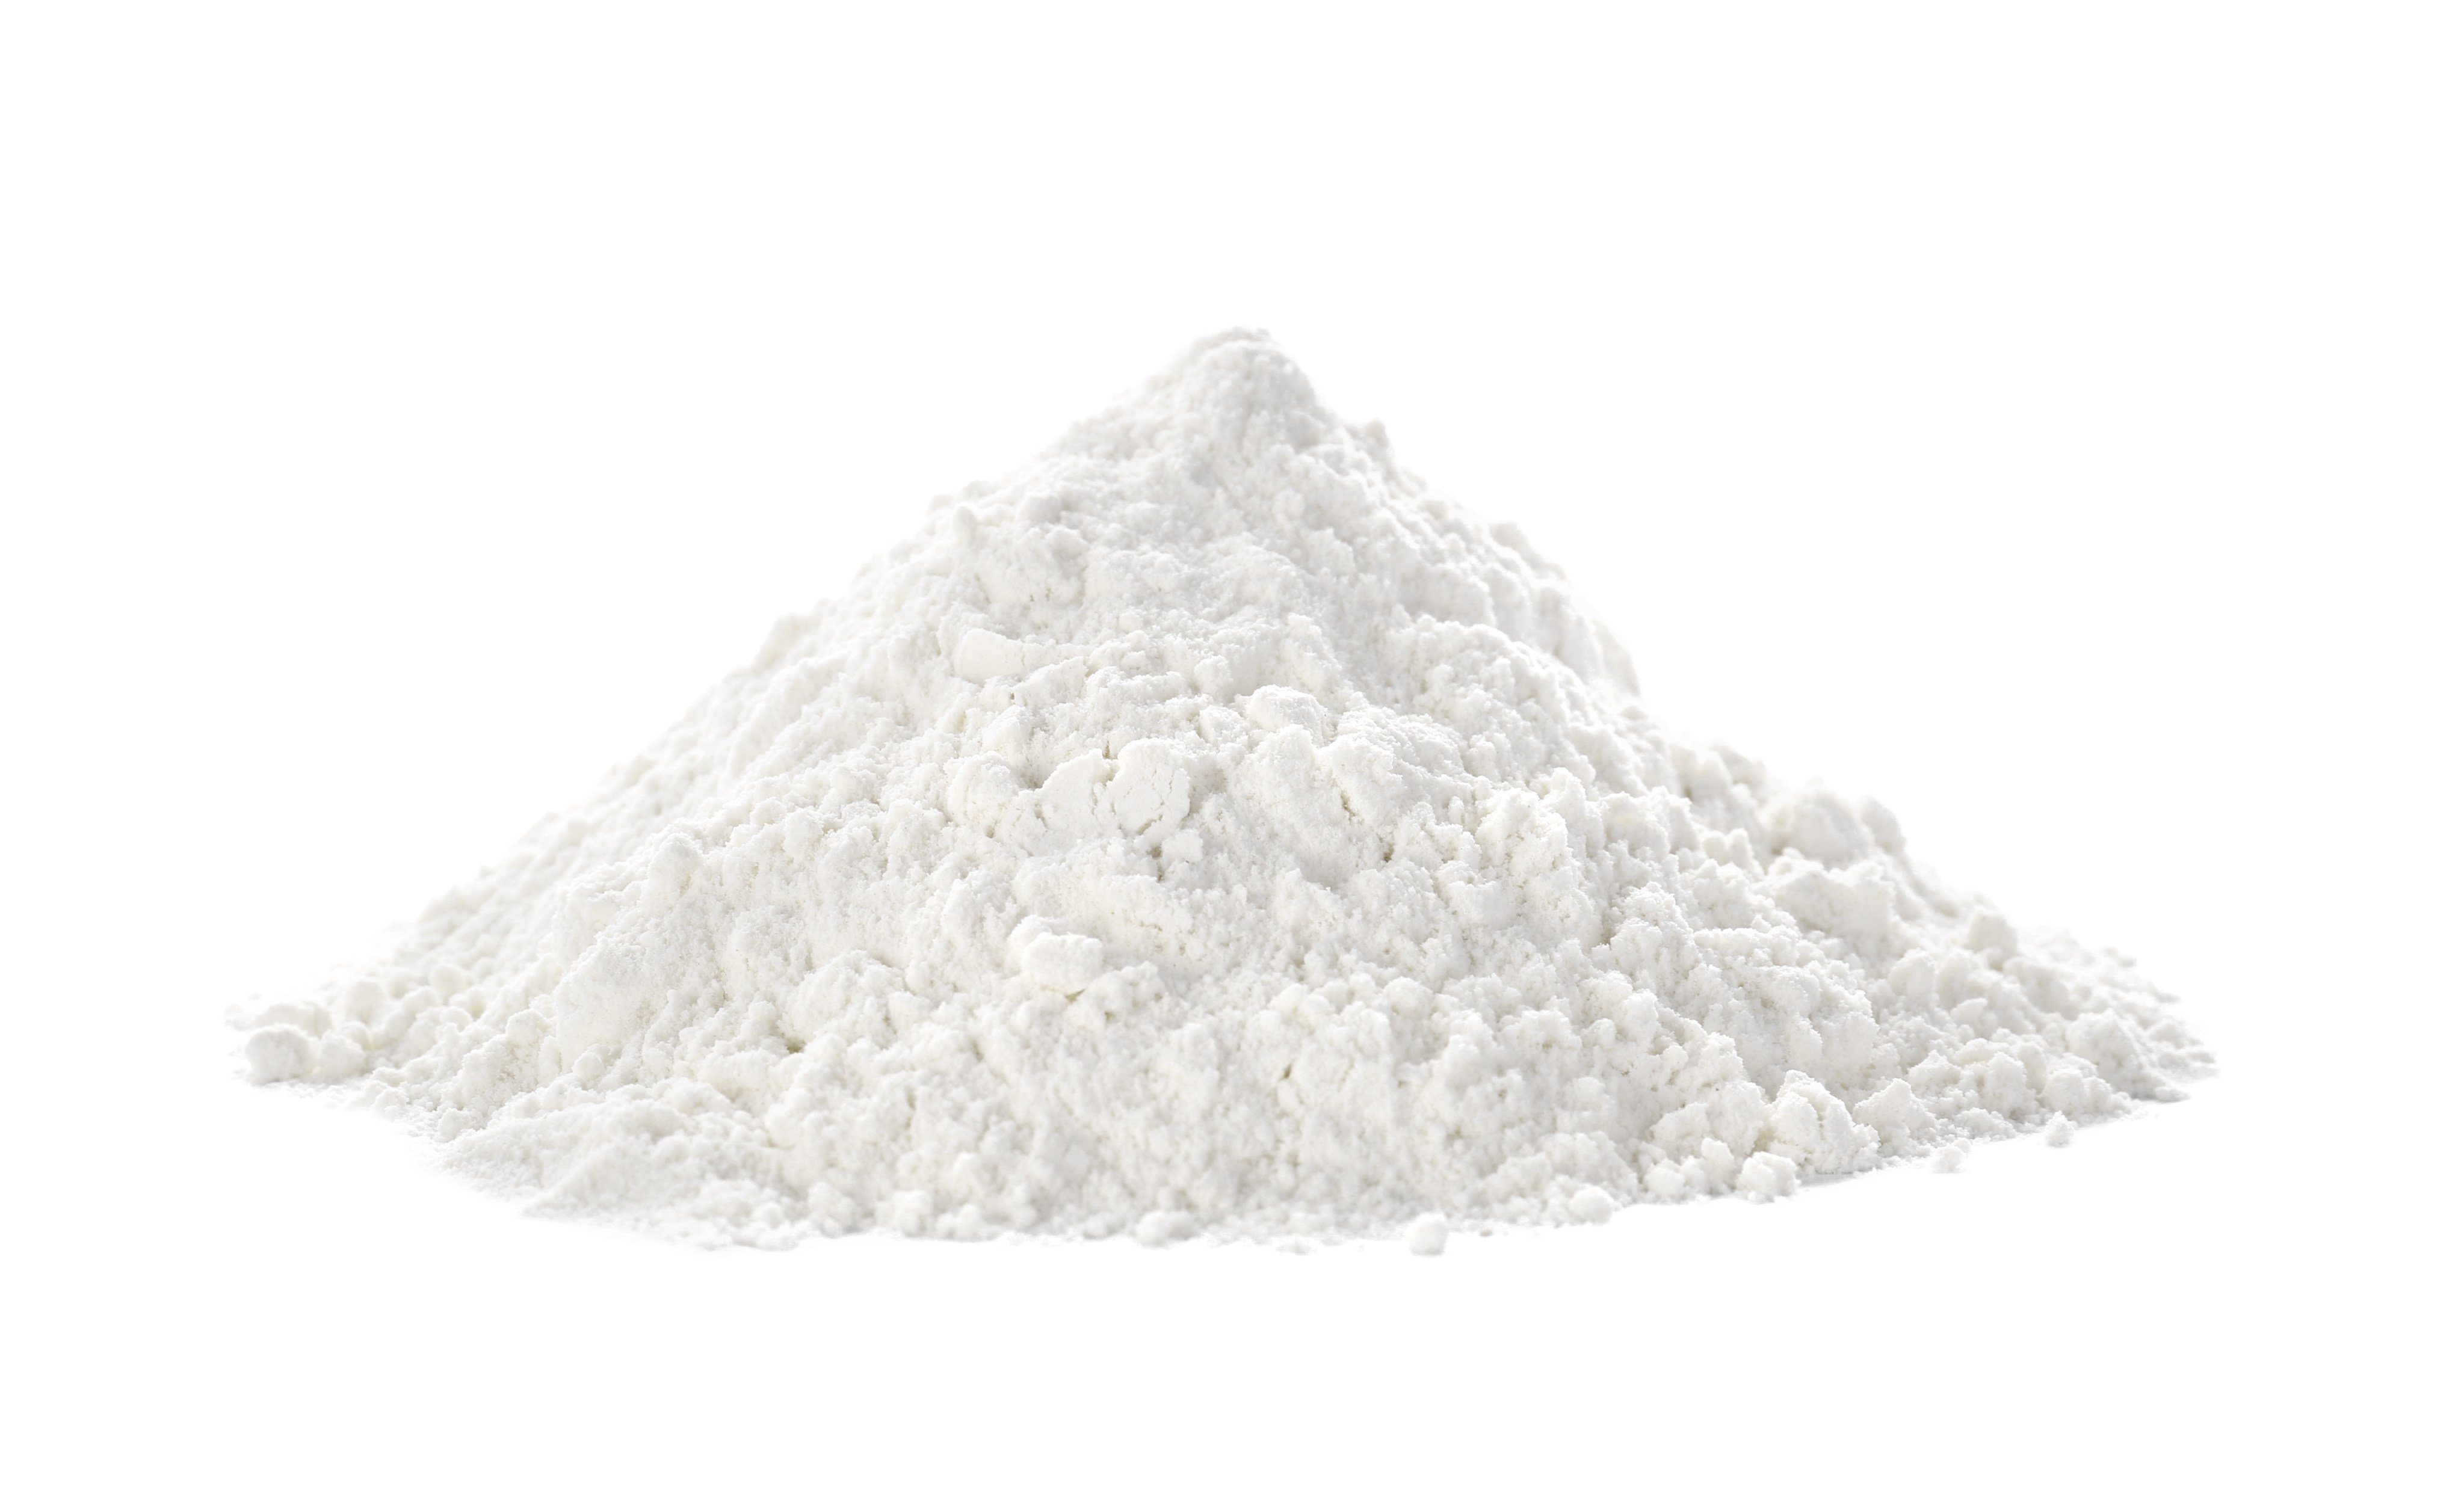 The police have arrested a woman over suspicious white powder sent to High Court worker. Photo: Shutterstock